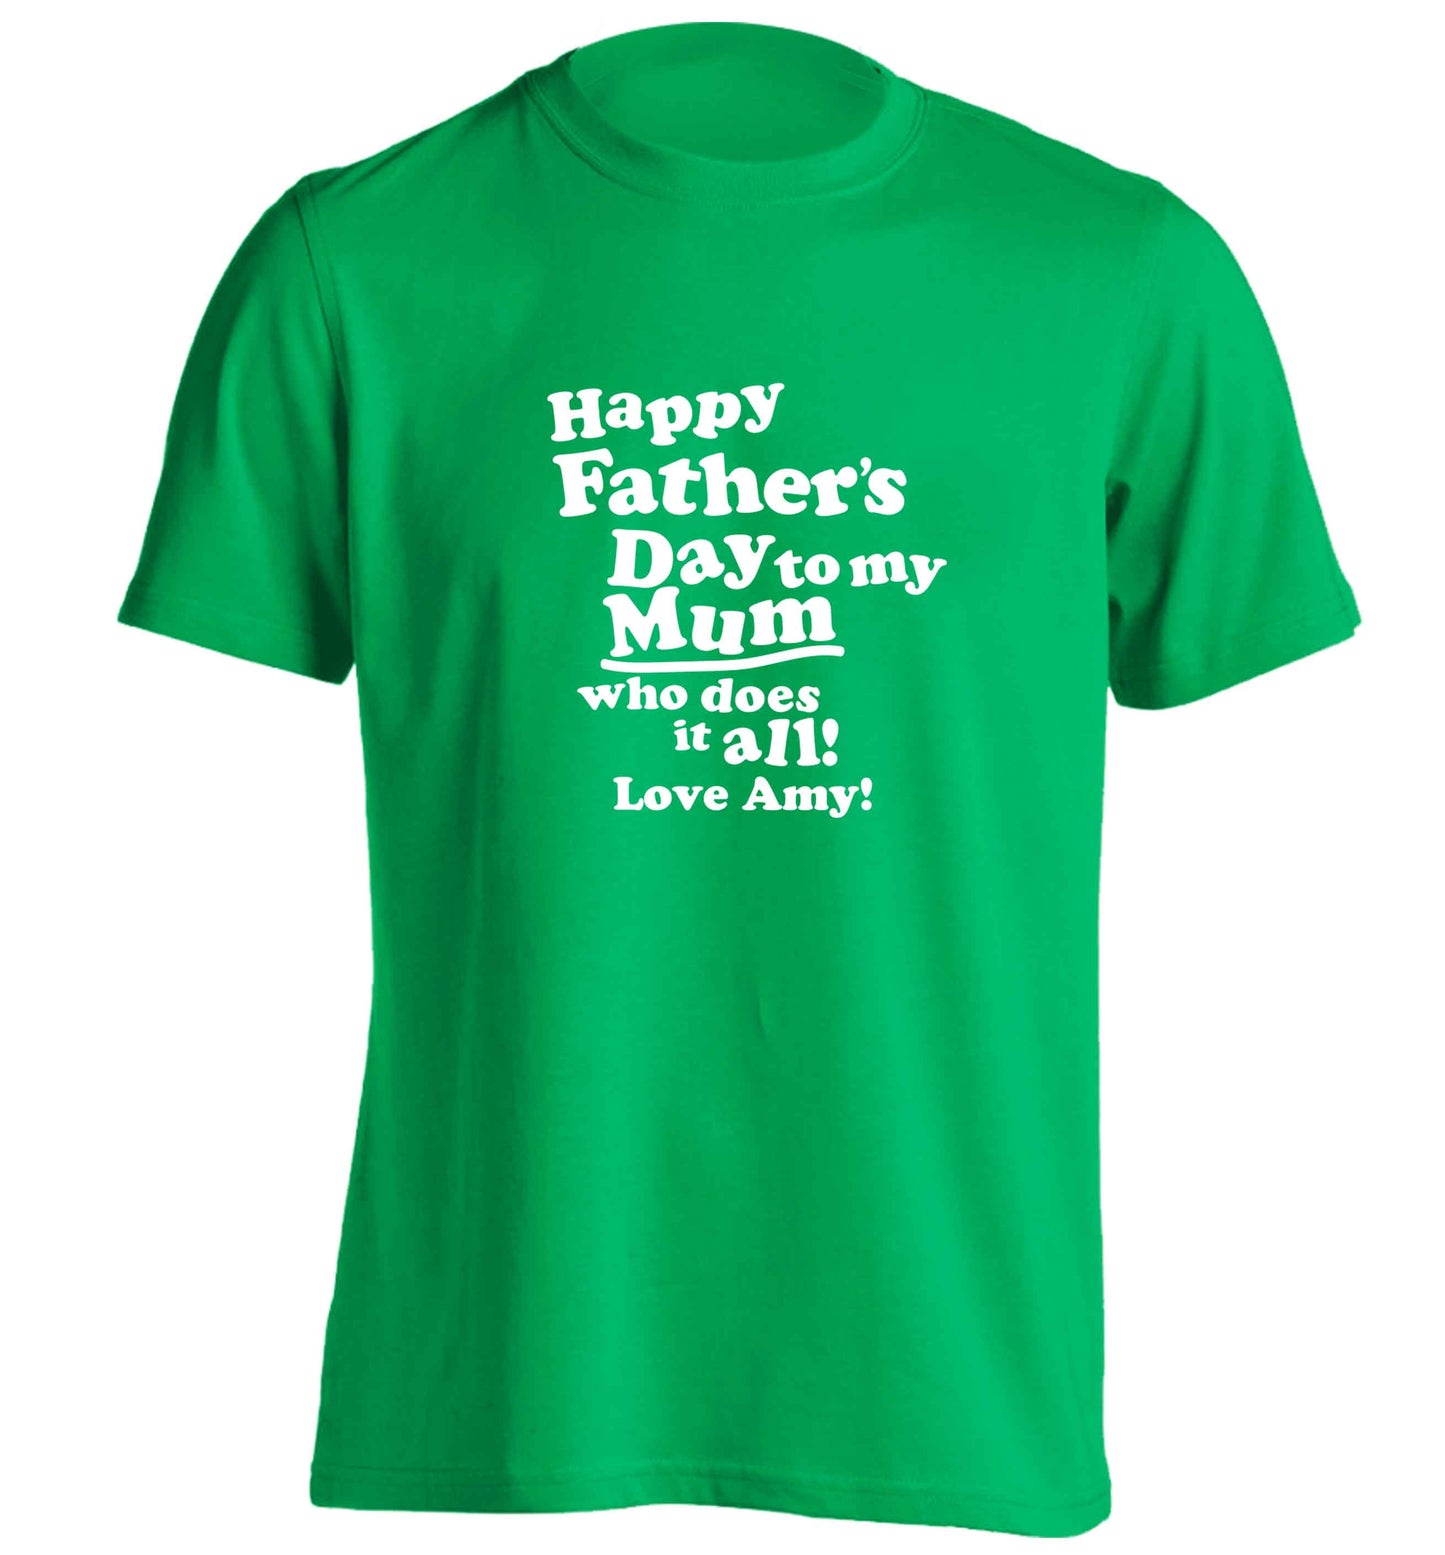 Happy Father's day to my mum who does it all adults unisex green Tshirt 2XL